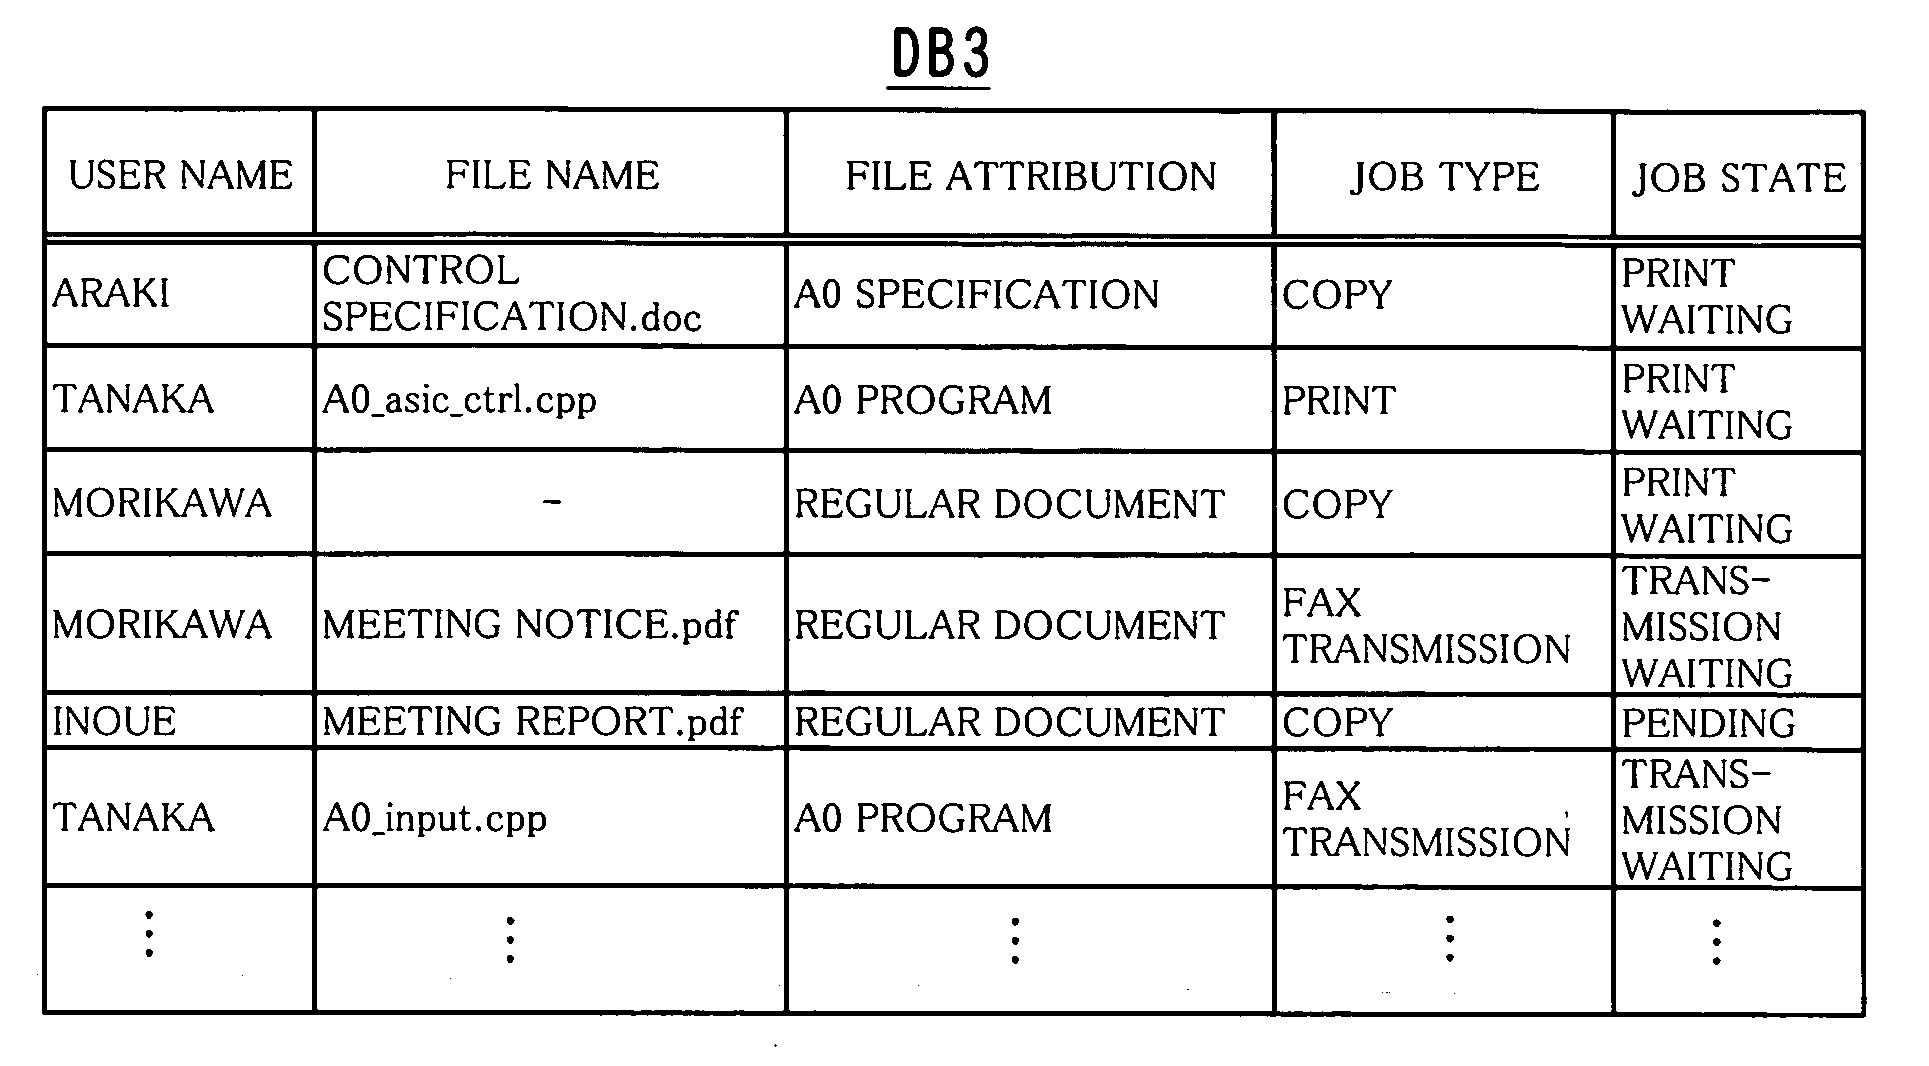 Data management device and method, image output device, and computer program product